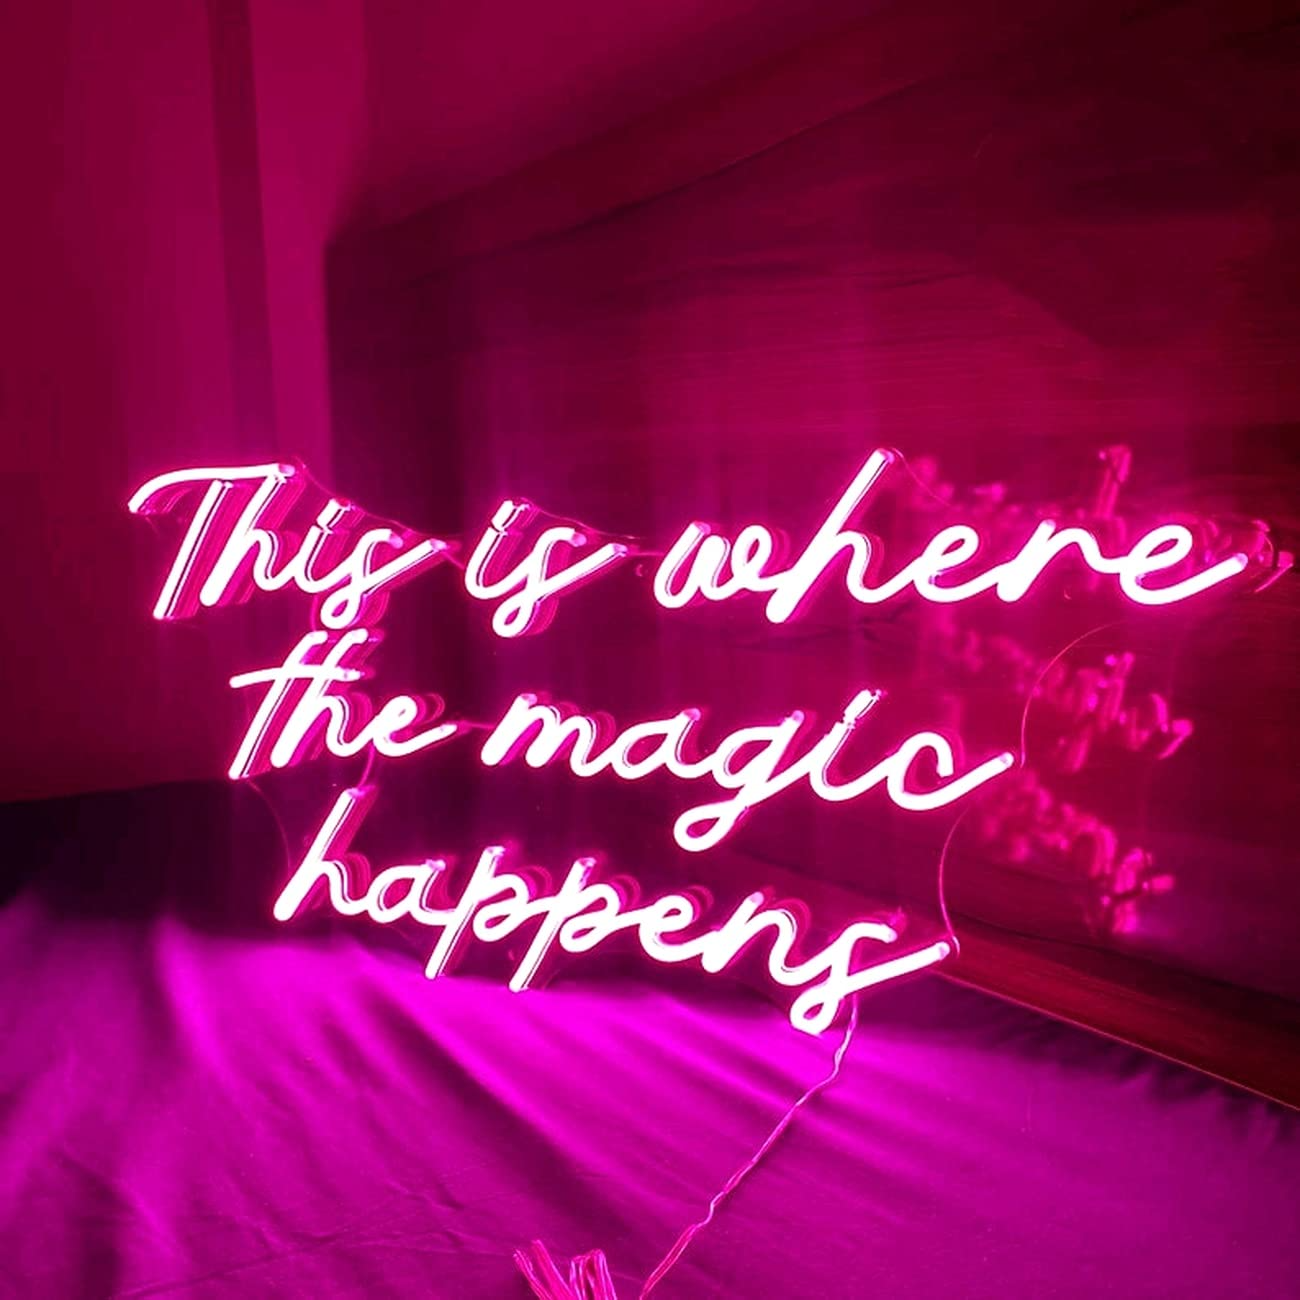 "This is Where Magic Happens" neon sign